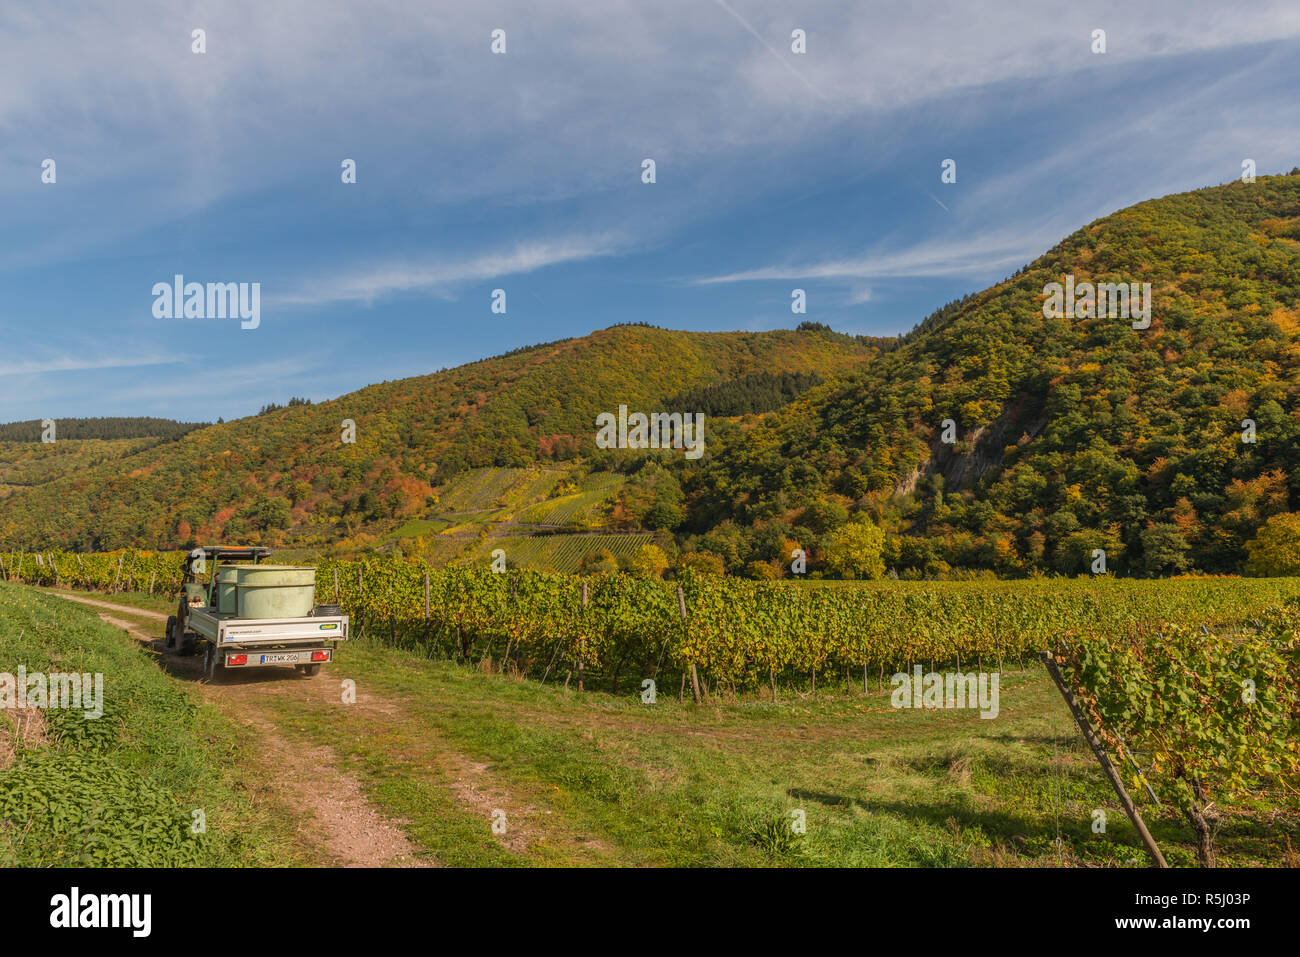 Pölich, landscape with vineyards along the Moselle River, driving to the winery having harvested grapes,  Rhineland-Palatinate, Germany, Europe Stock Photo